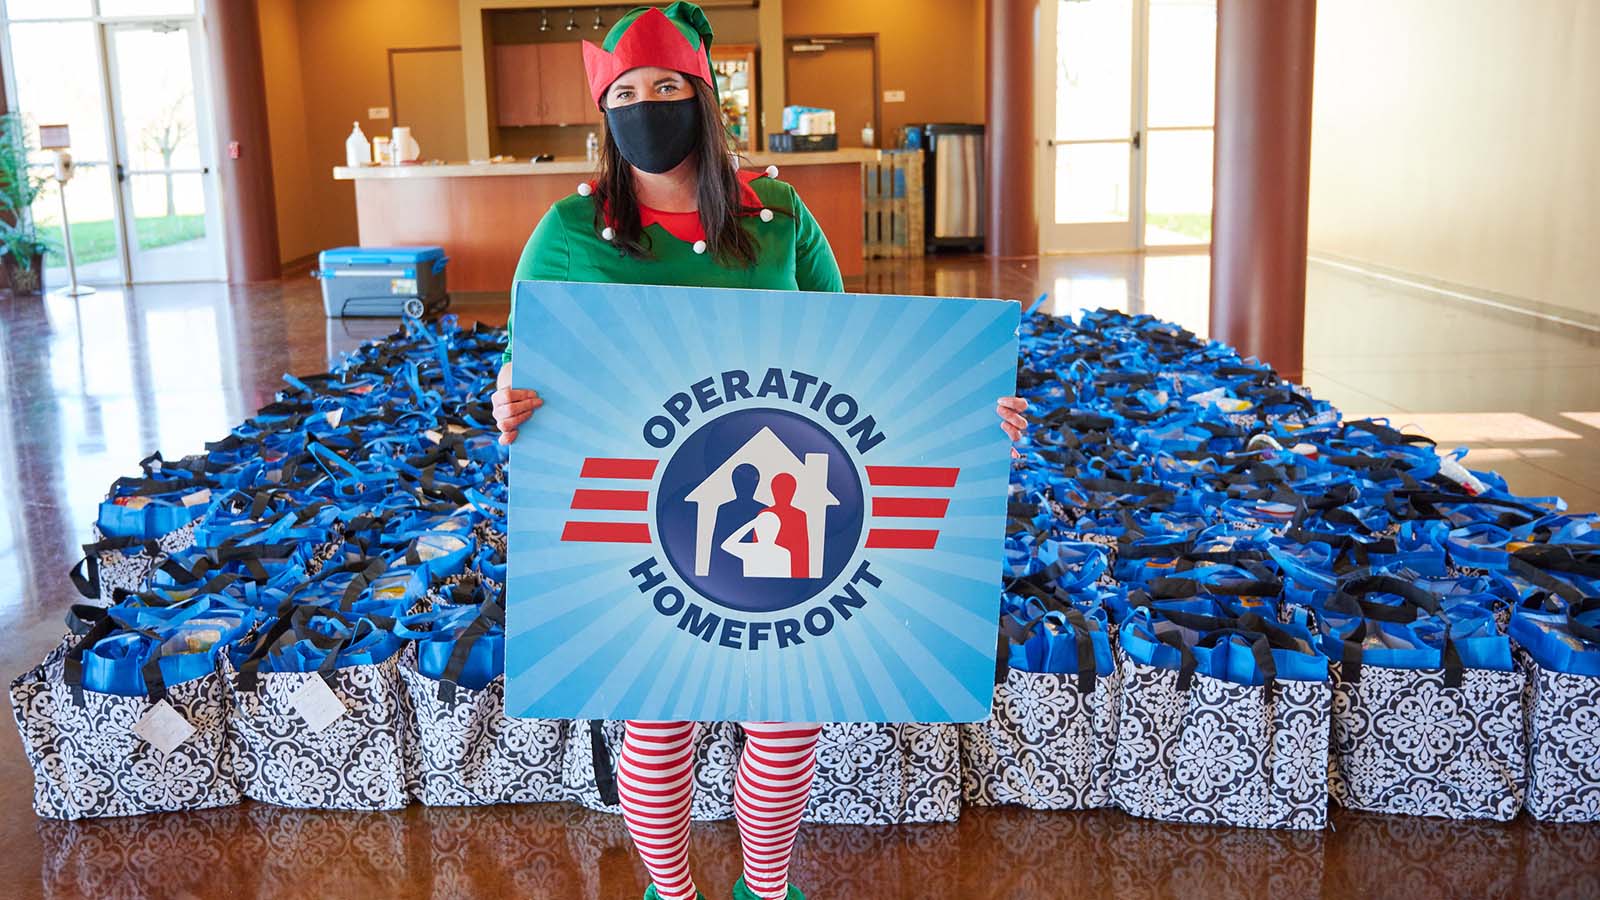 Operation Homefront volunteer dressed as an elf holding a sign at a Holiday Meals for Military event.